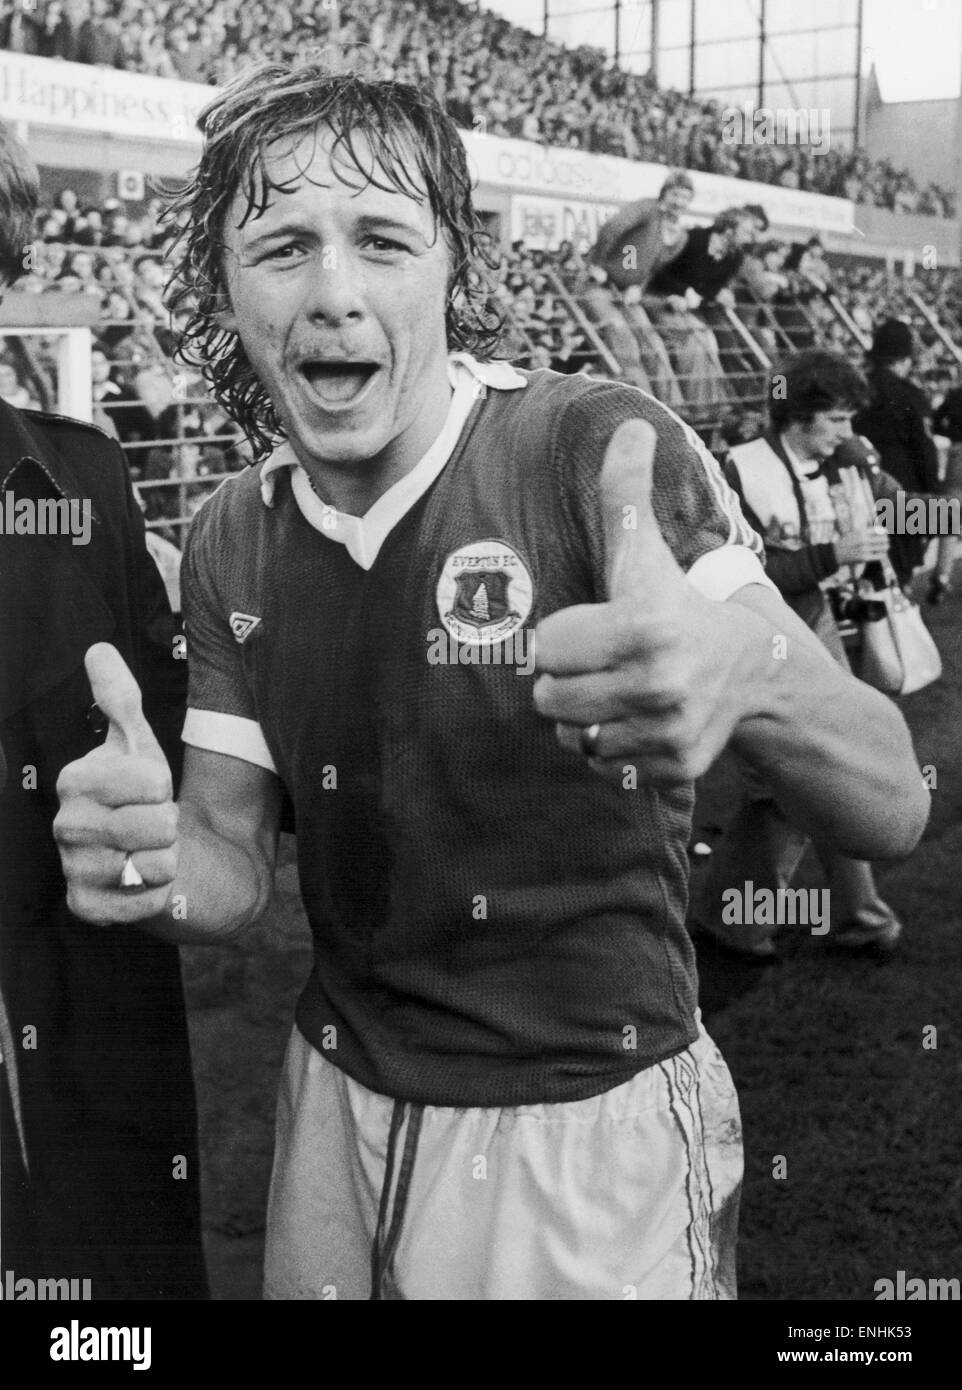 English League Division One match at Goodison Park. Everton 1 v Liverpool 0. Thumbs up from Everton hero Andy king who scored the only goal in the derby match . 28th October 1978. Stock Photo